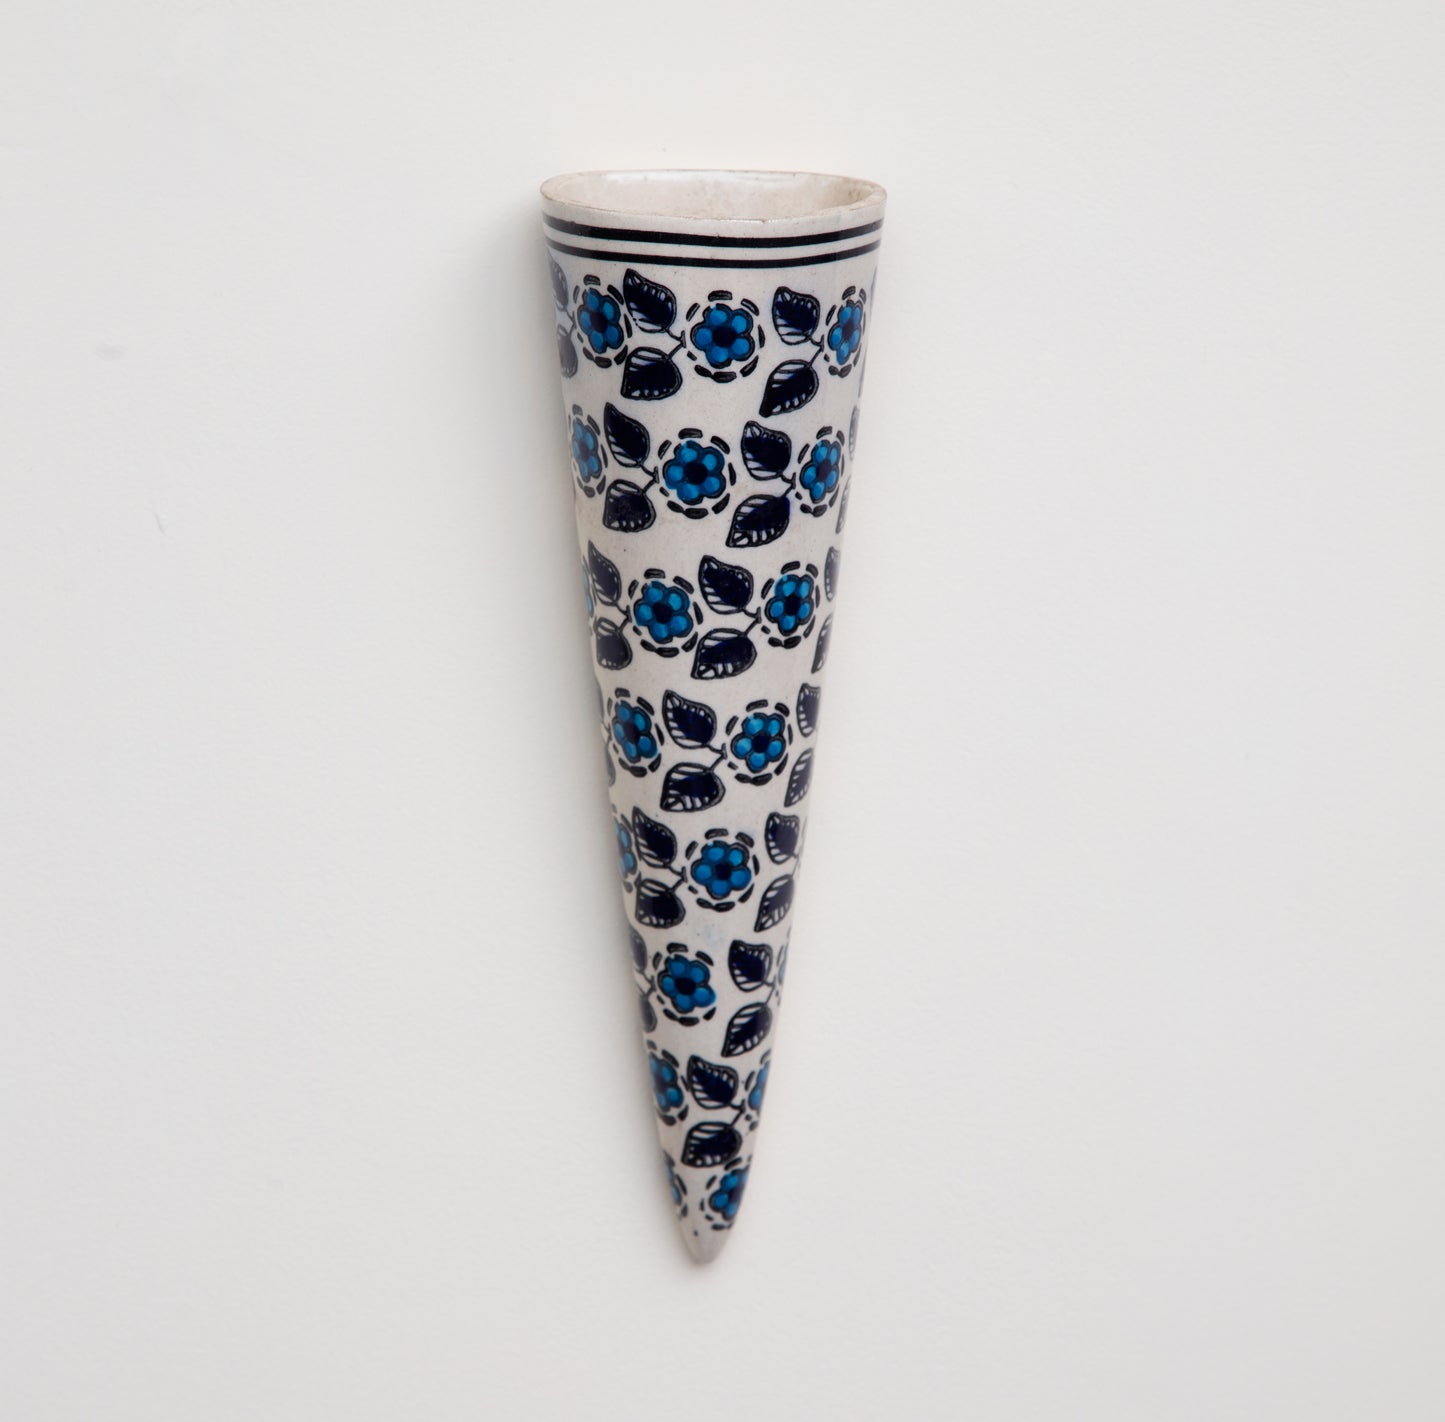 Ceramic Cone Wall Hanging or Mounting Decorative Vase for Flowers Buds and Twigs